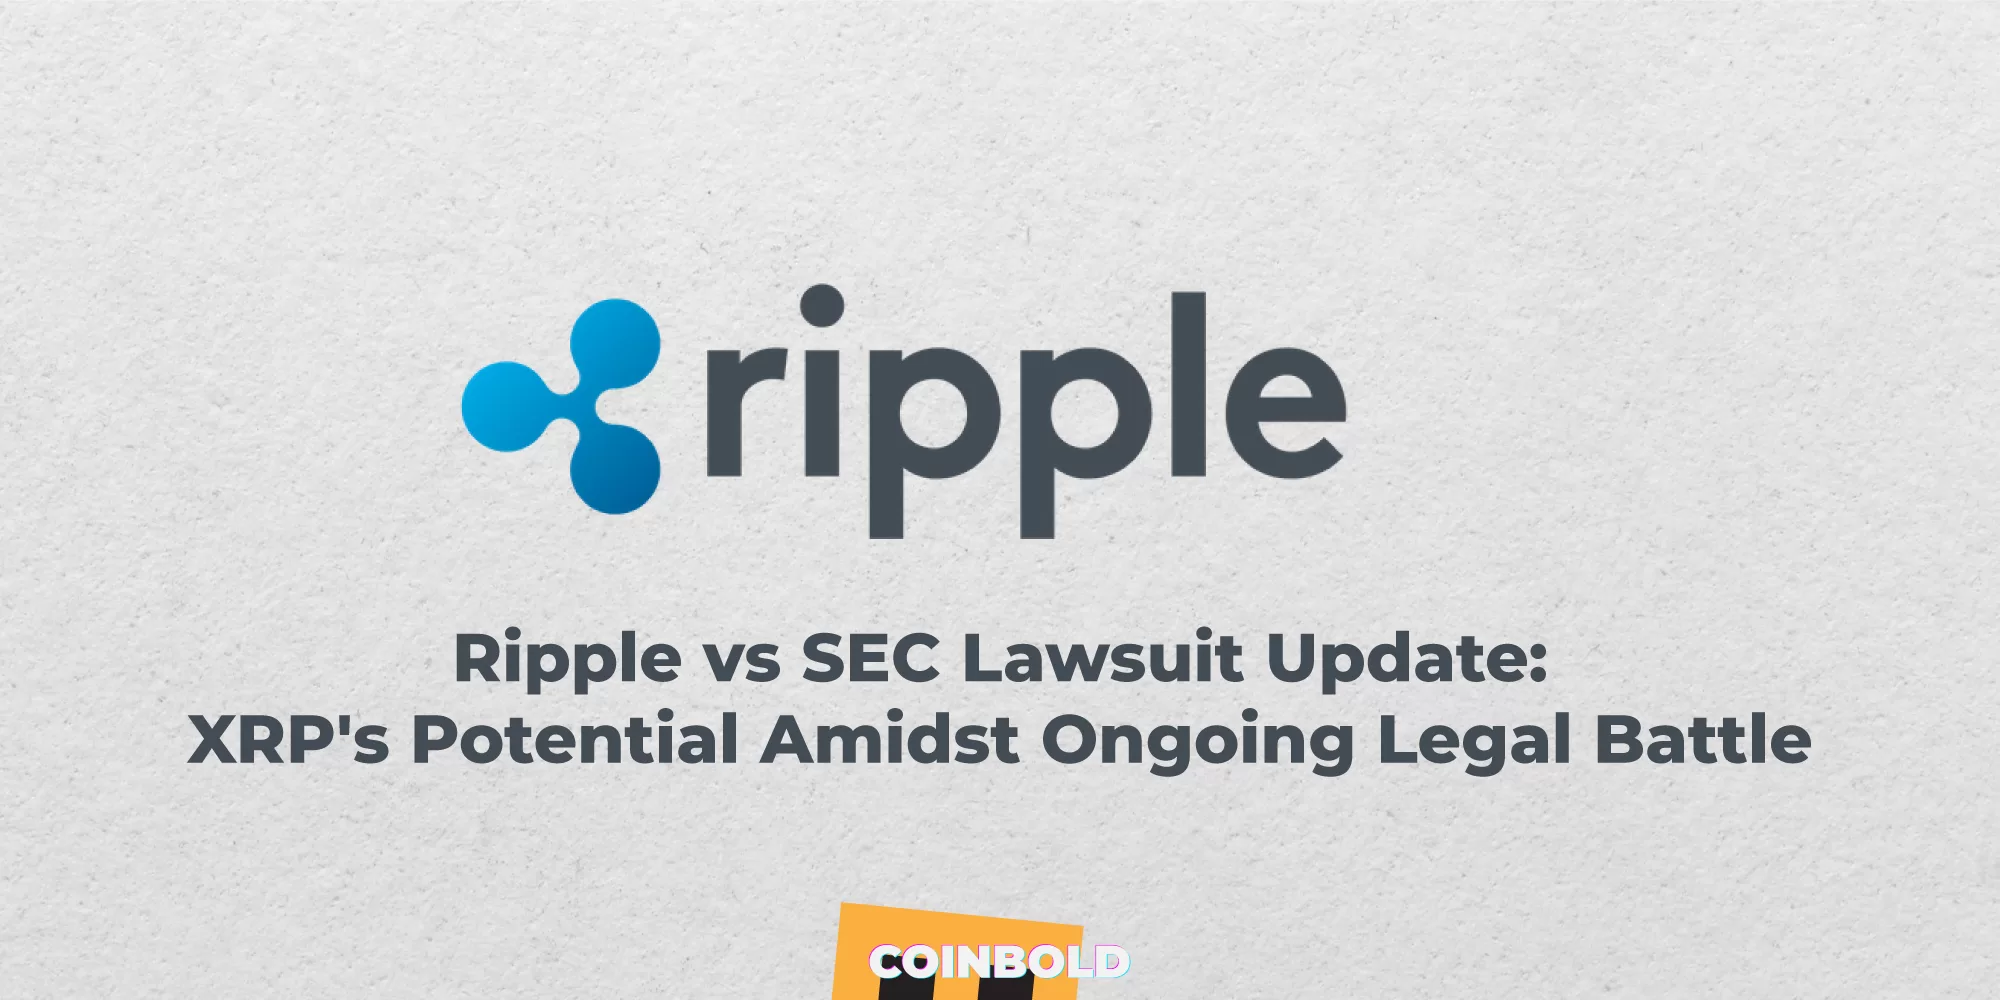 Ripple vs SEC Lawsuit Update: XRP's Potential Amidst Ongoing Legal Battle